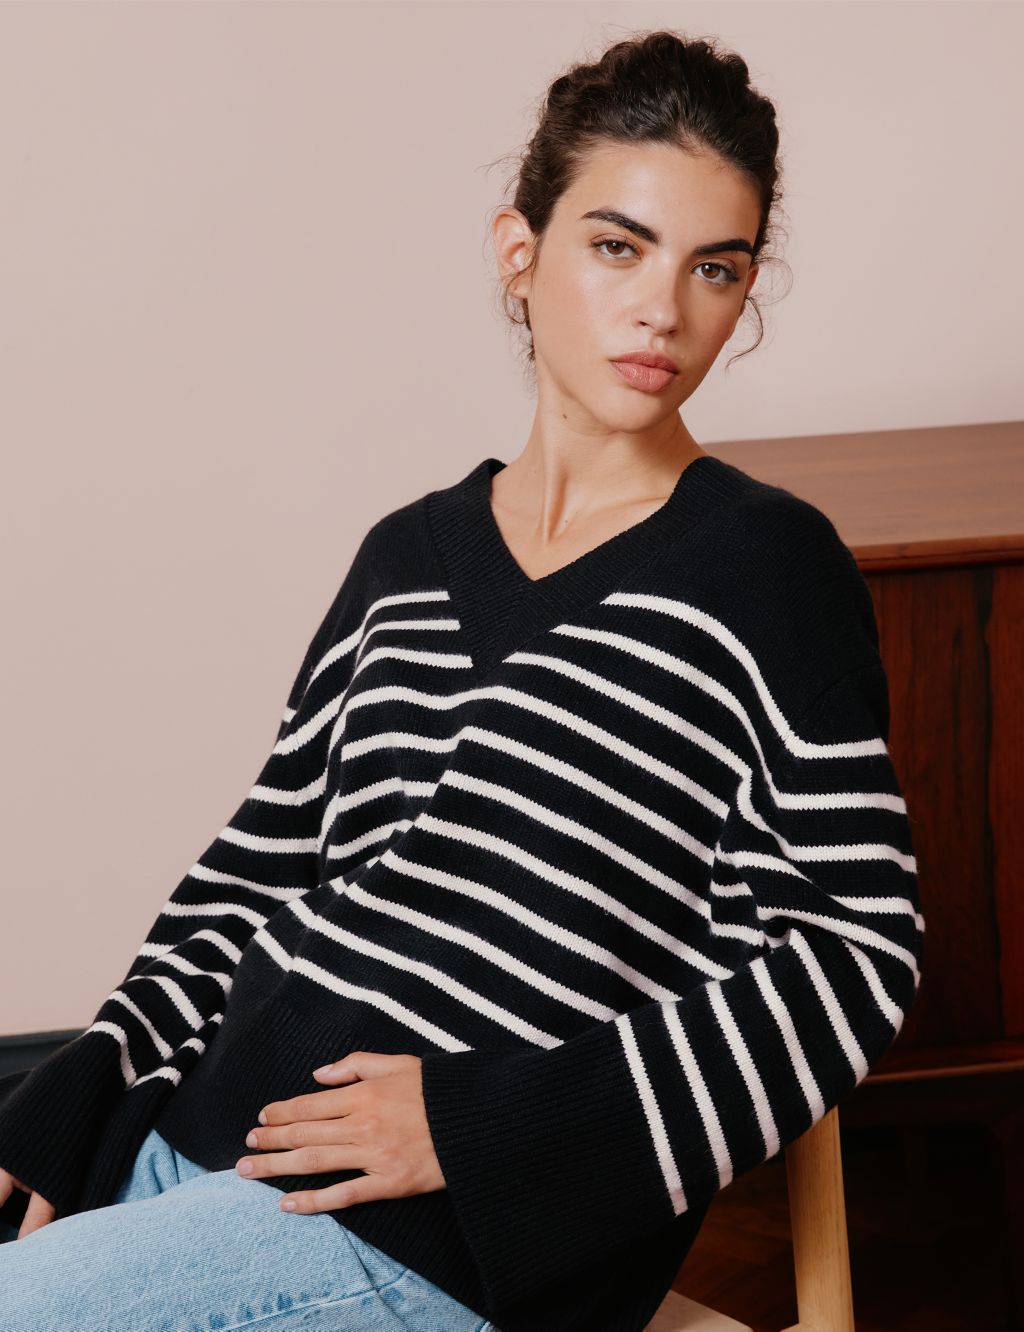 Striped V-Neck Jumper with Wool image 1